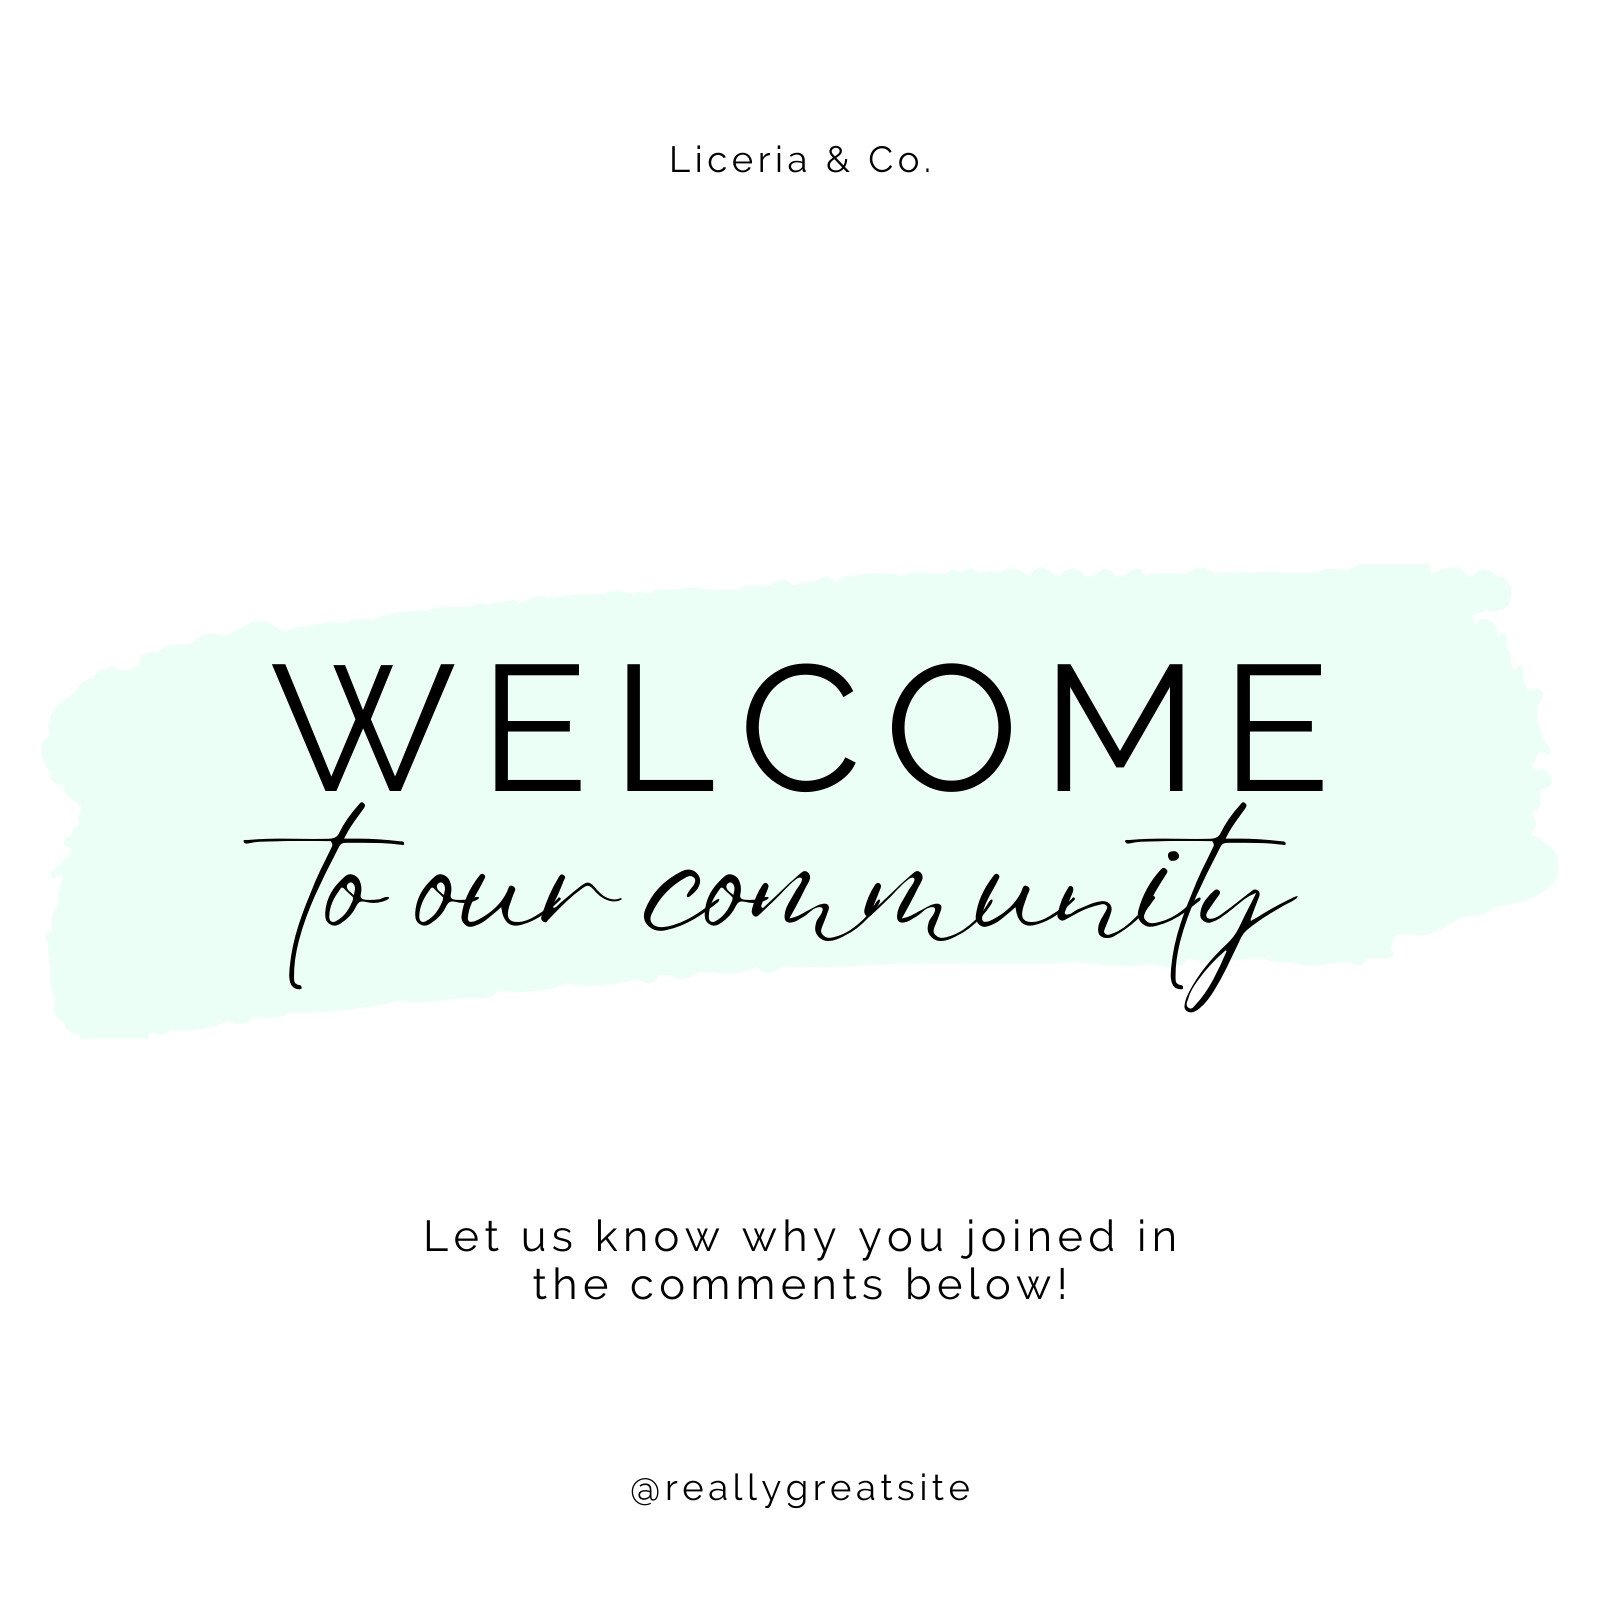 Free and customizable welcome templates